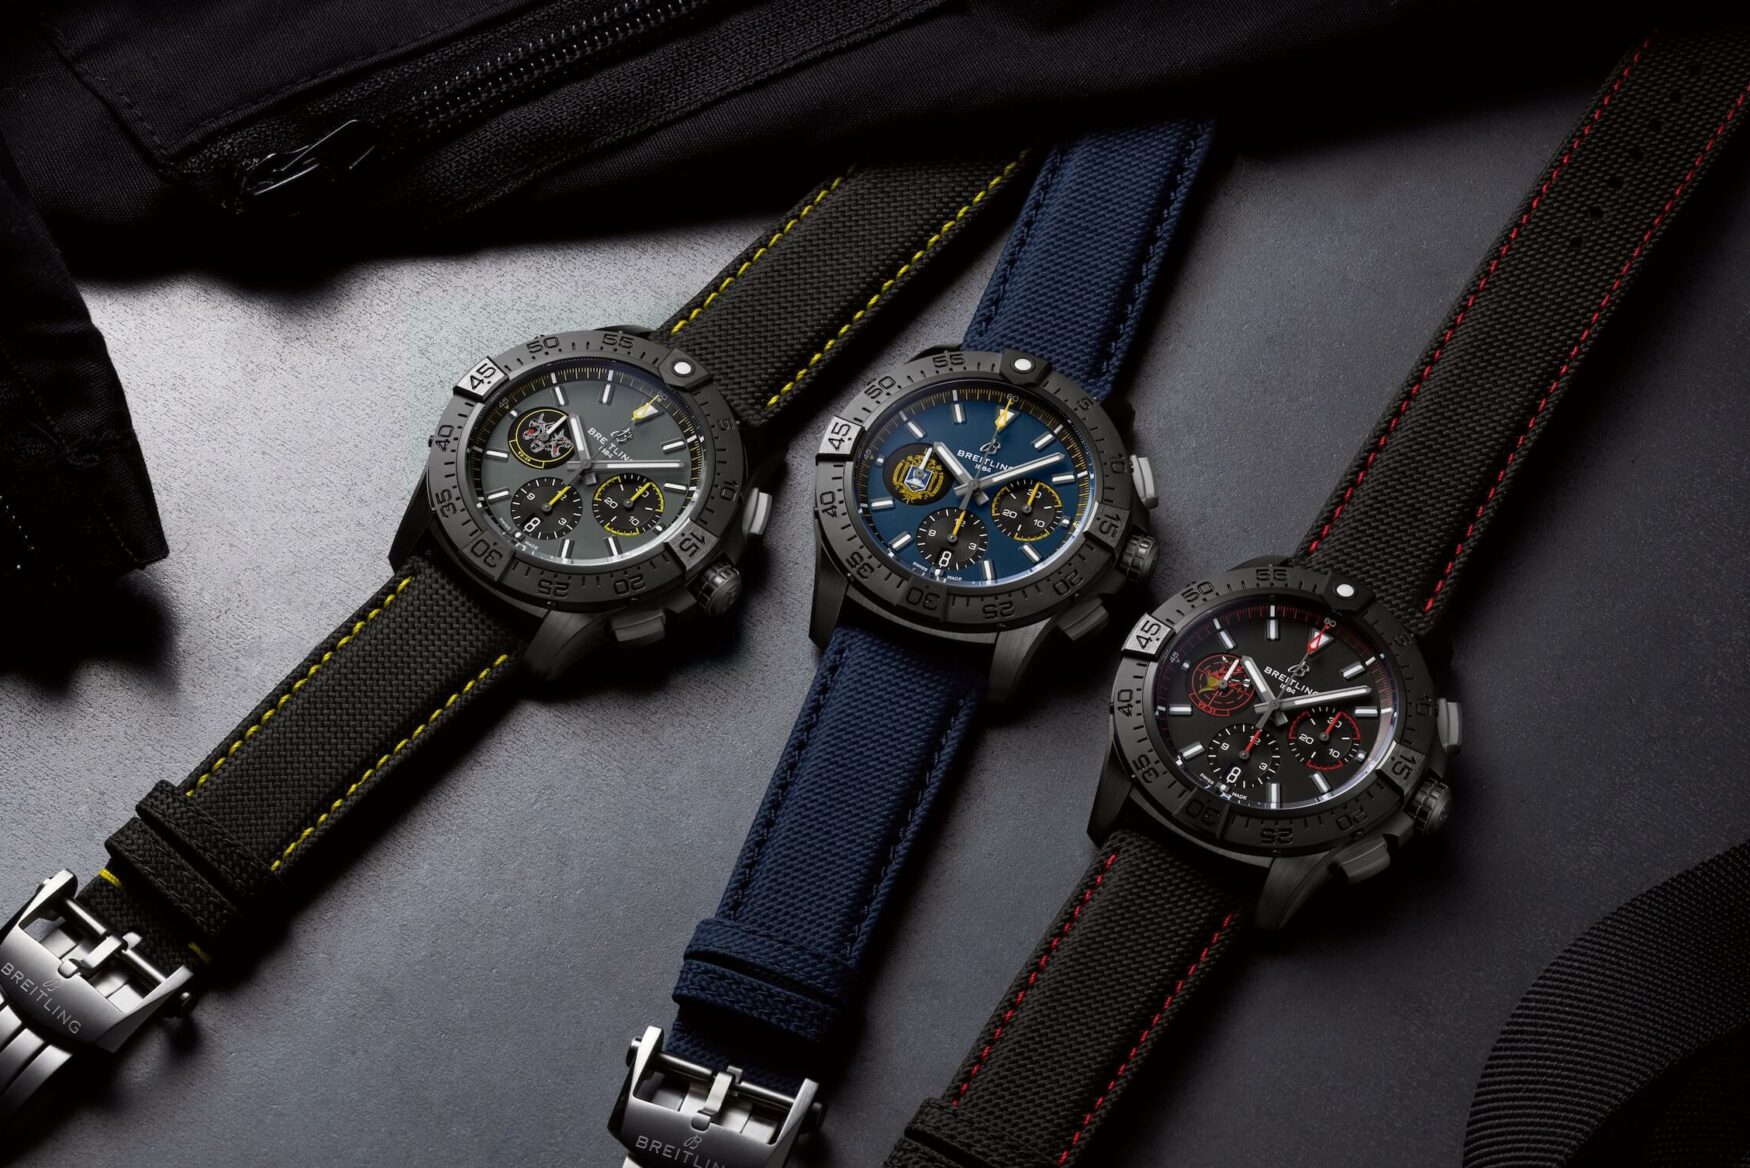 Breitling honours elite U.S. naval aviation forces with new Avenger Night Mission collection